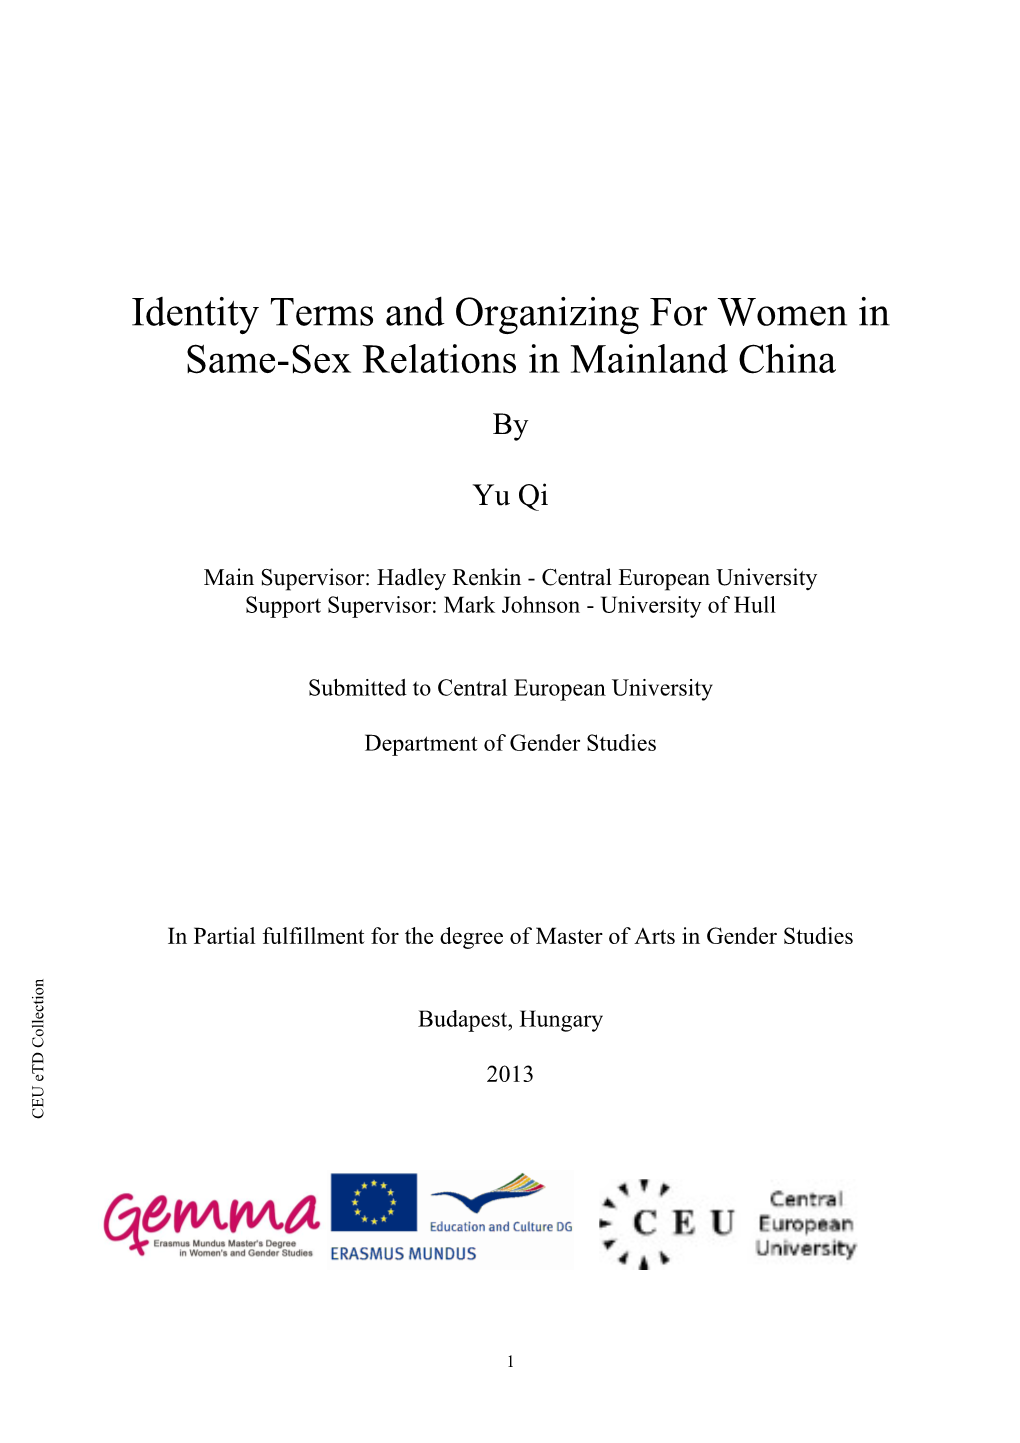 Identity Terms and Organizing for Women in Same-Sex Relations In